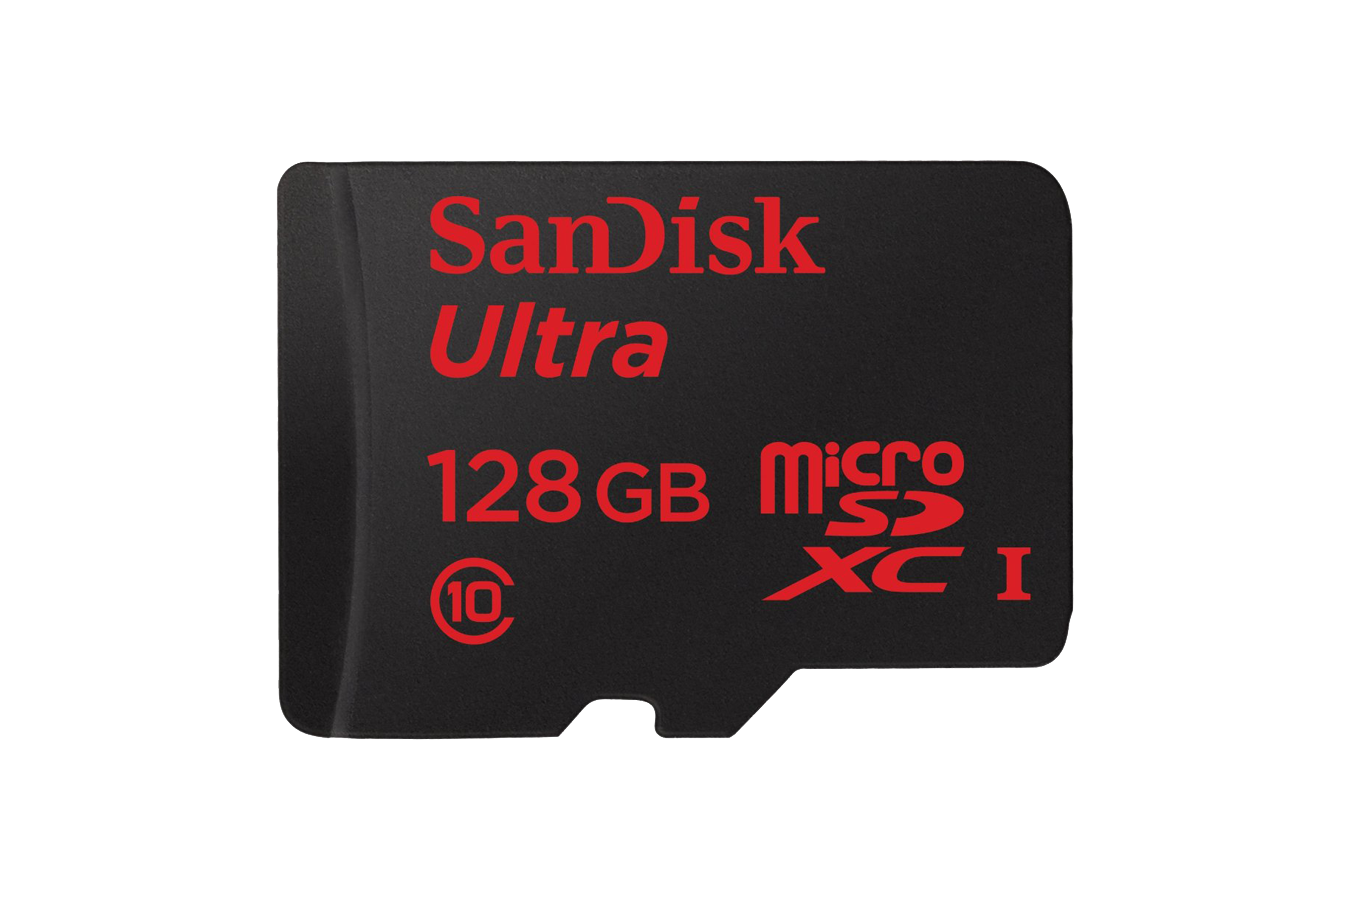 Support, Faq, Recommended Sd Card Size